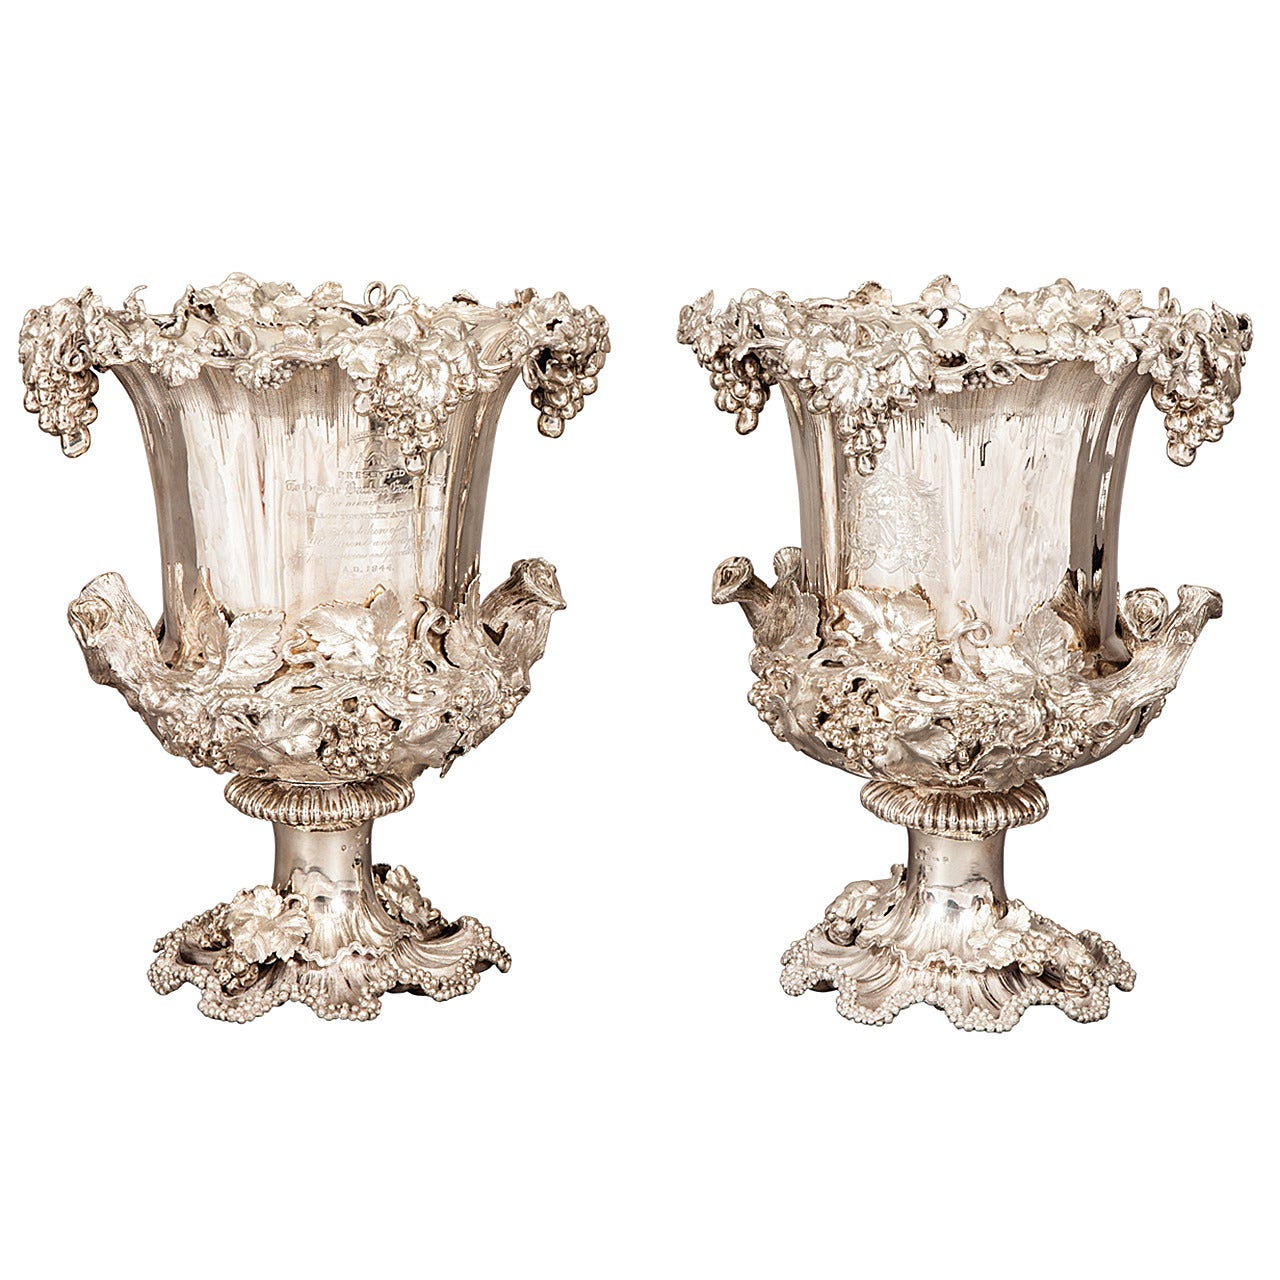 Pair of Solid Silver Wine Coolers By Elkington & Mason of Birmingham